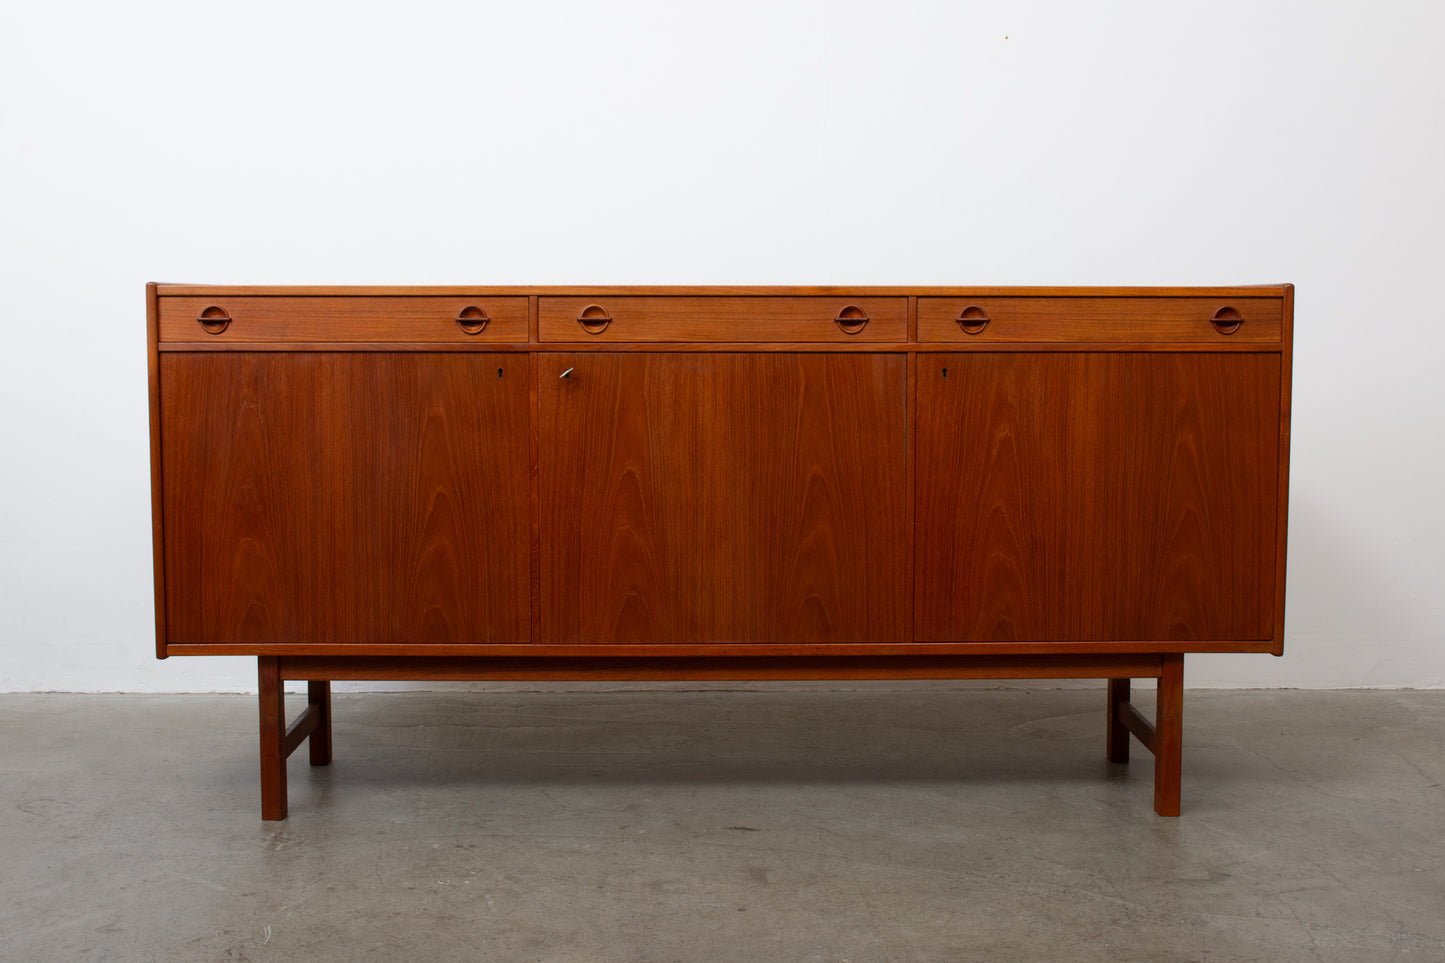 1960s teak sideboard by Tage Olofsson